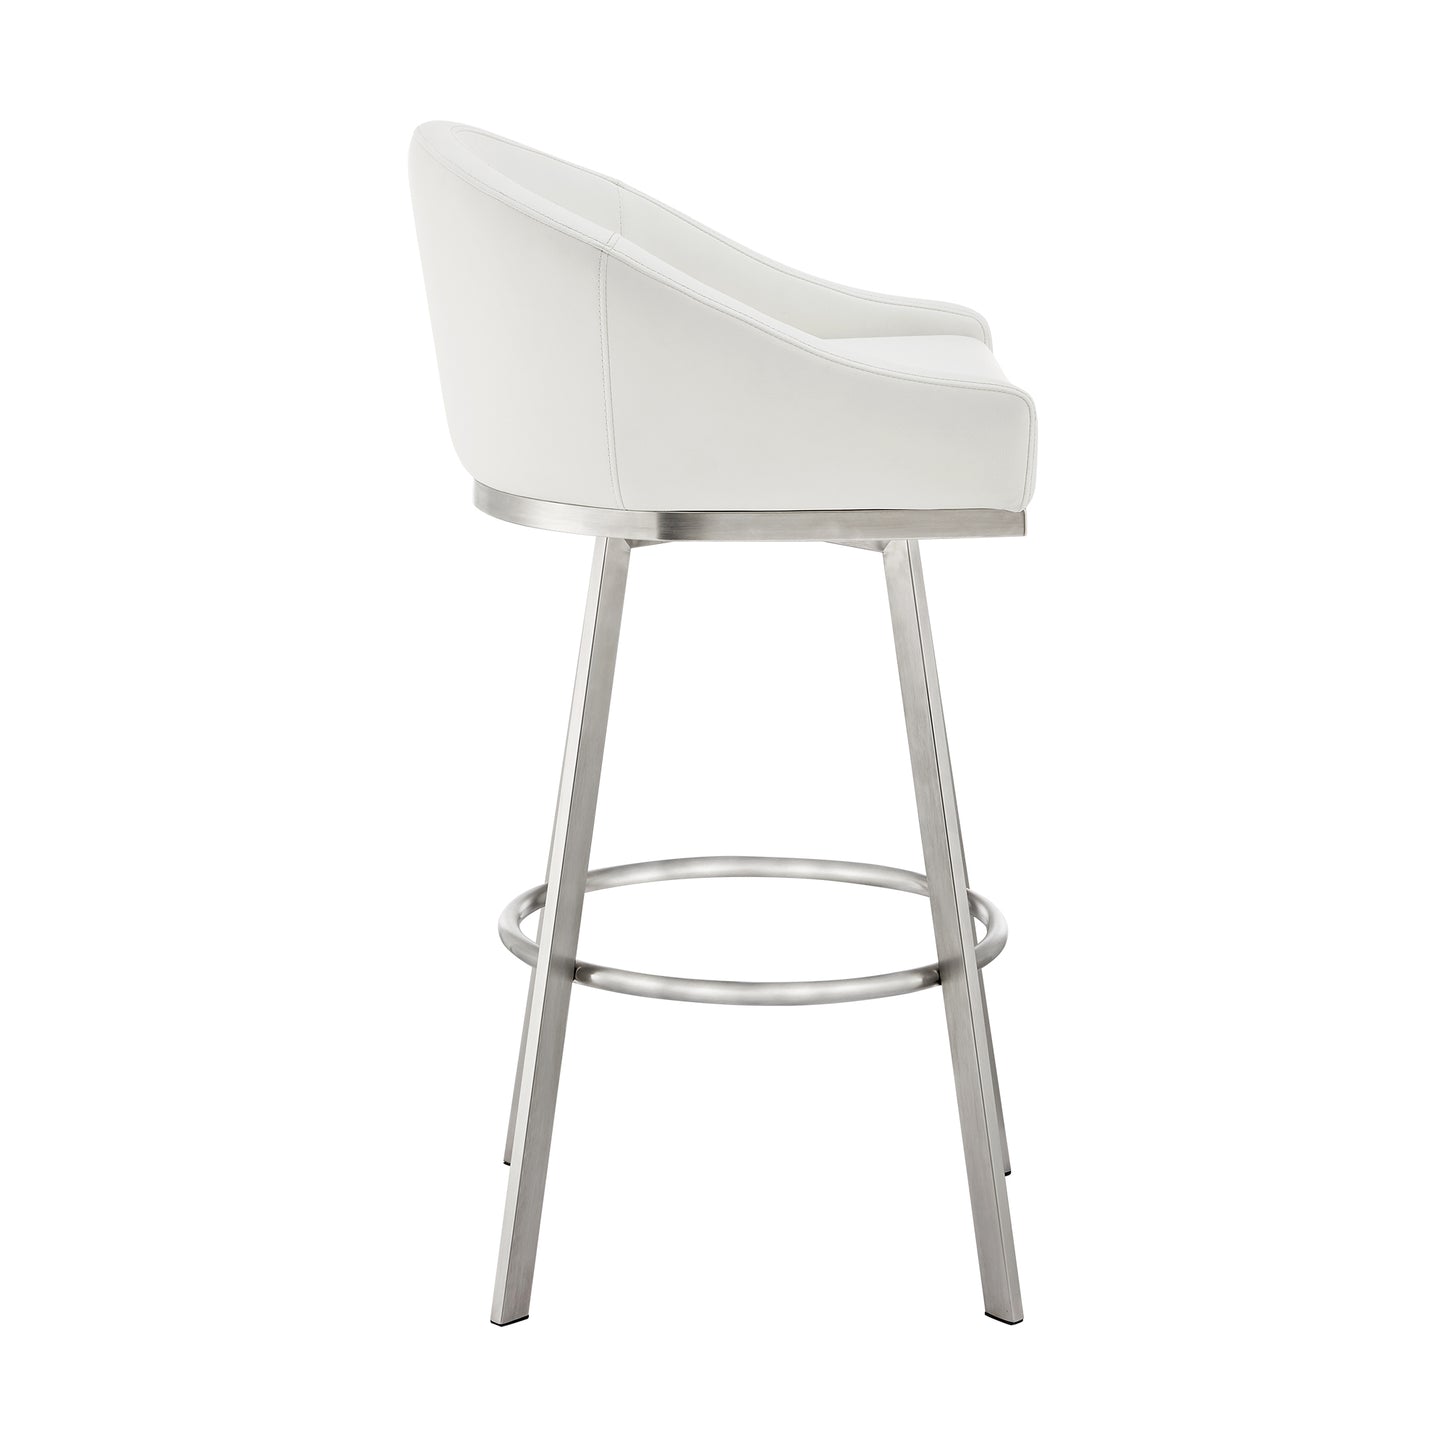 Eleanor 26" Swivel Counter Stool in Brushed Stainless Steel with White Faux Leather